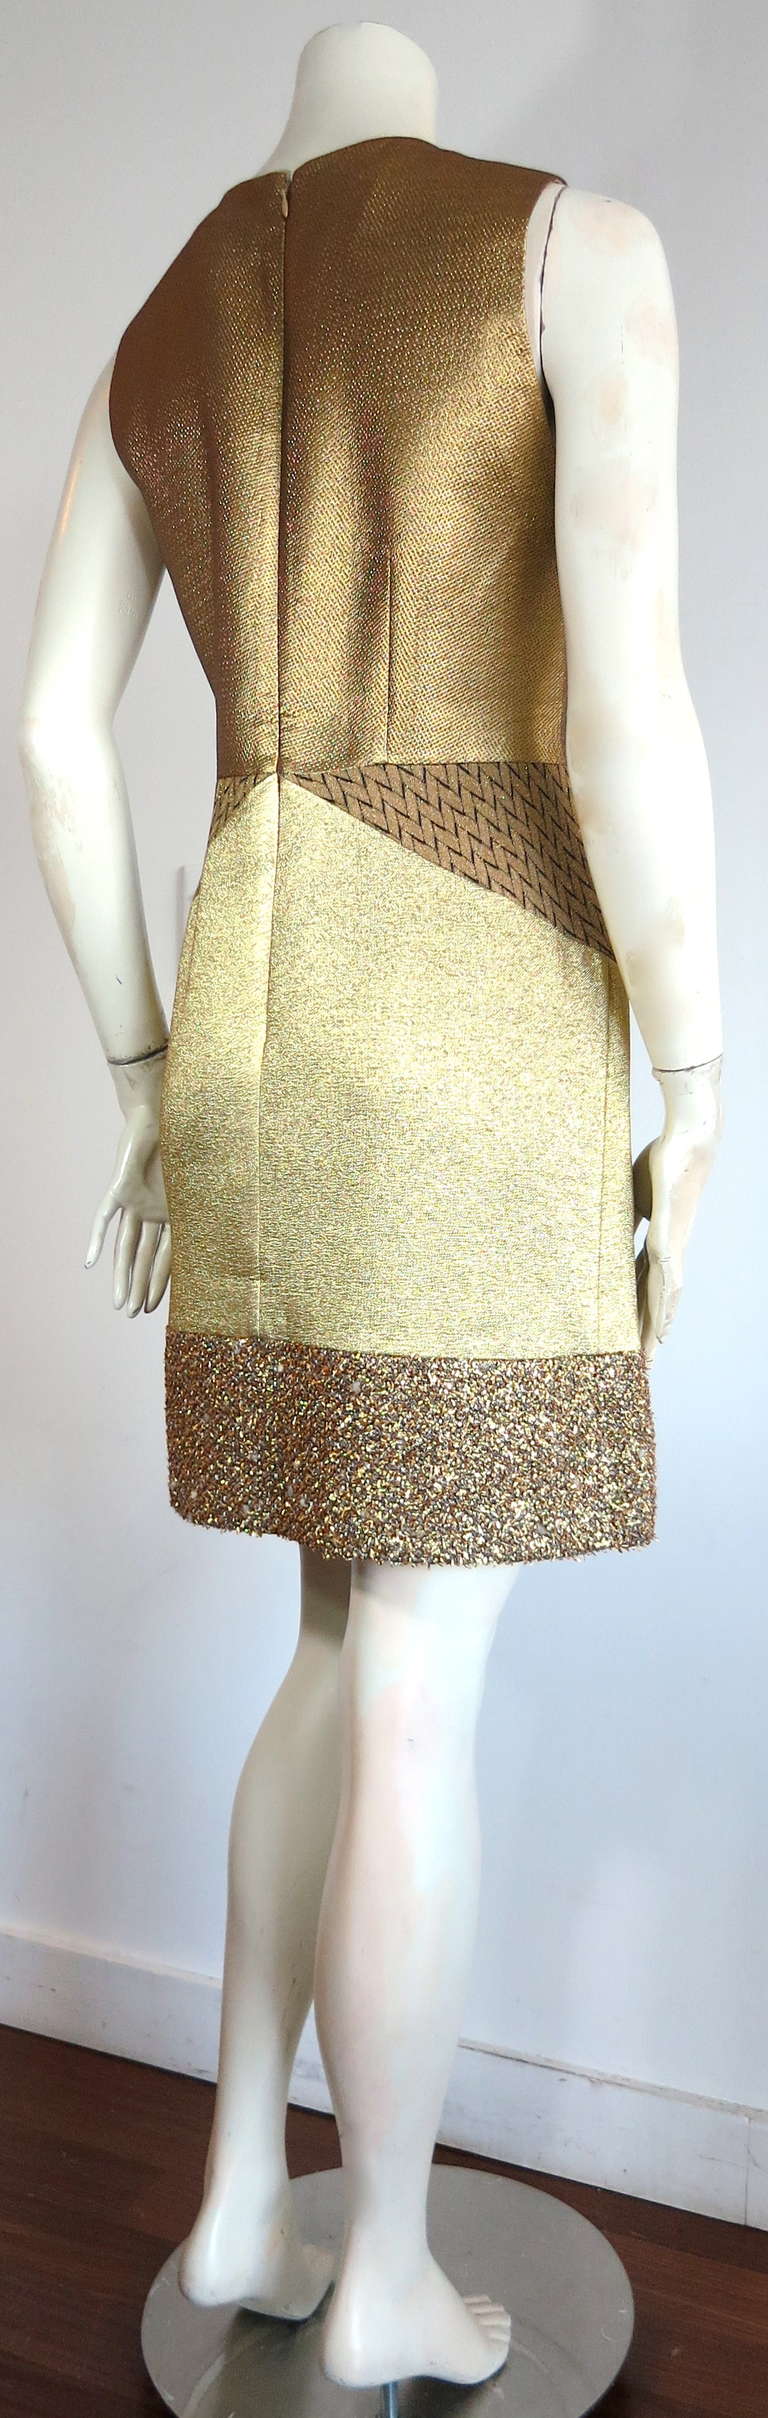 New MISSONI ITALY Metallic gold patchwork cocktail dress 2